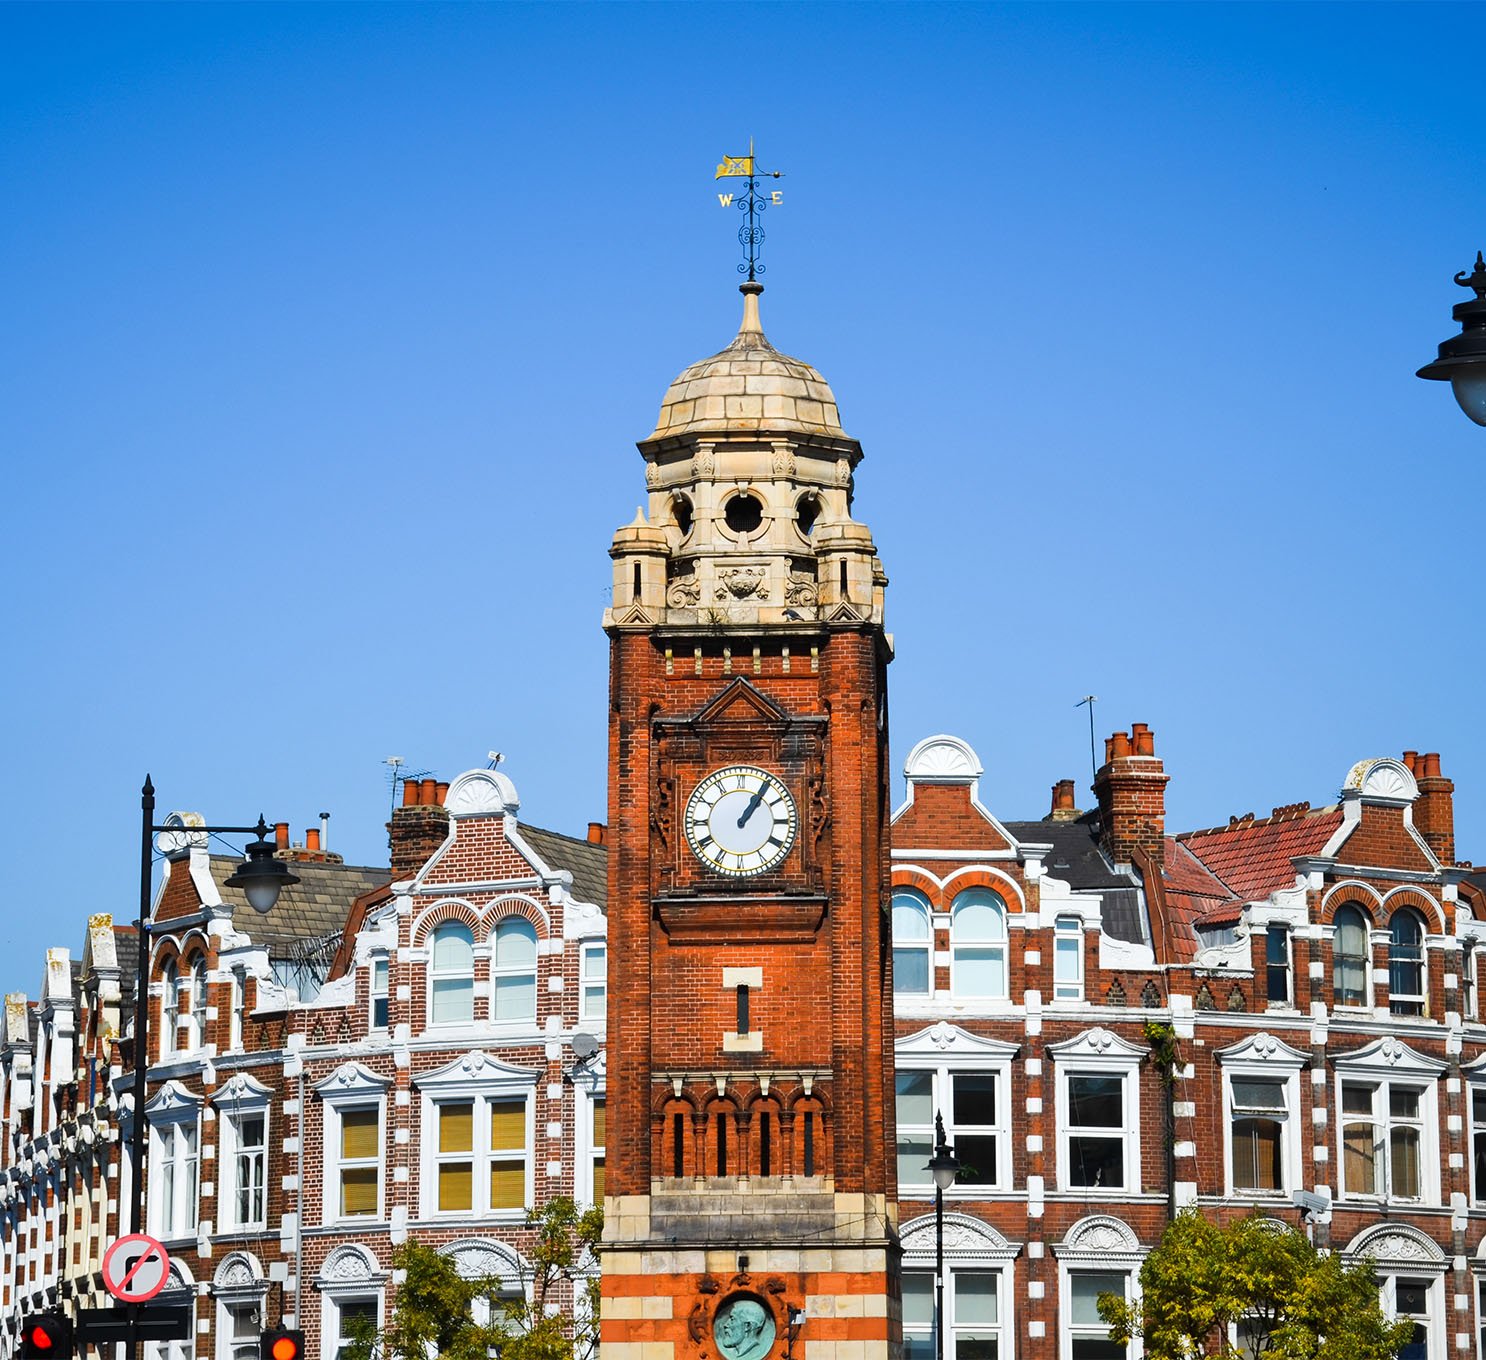 Clock tower in Crouch End, London UK